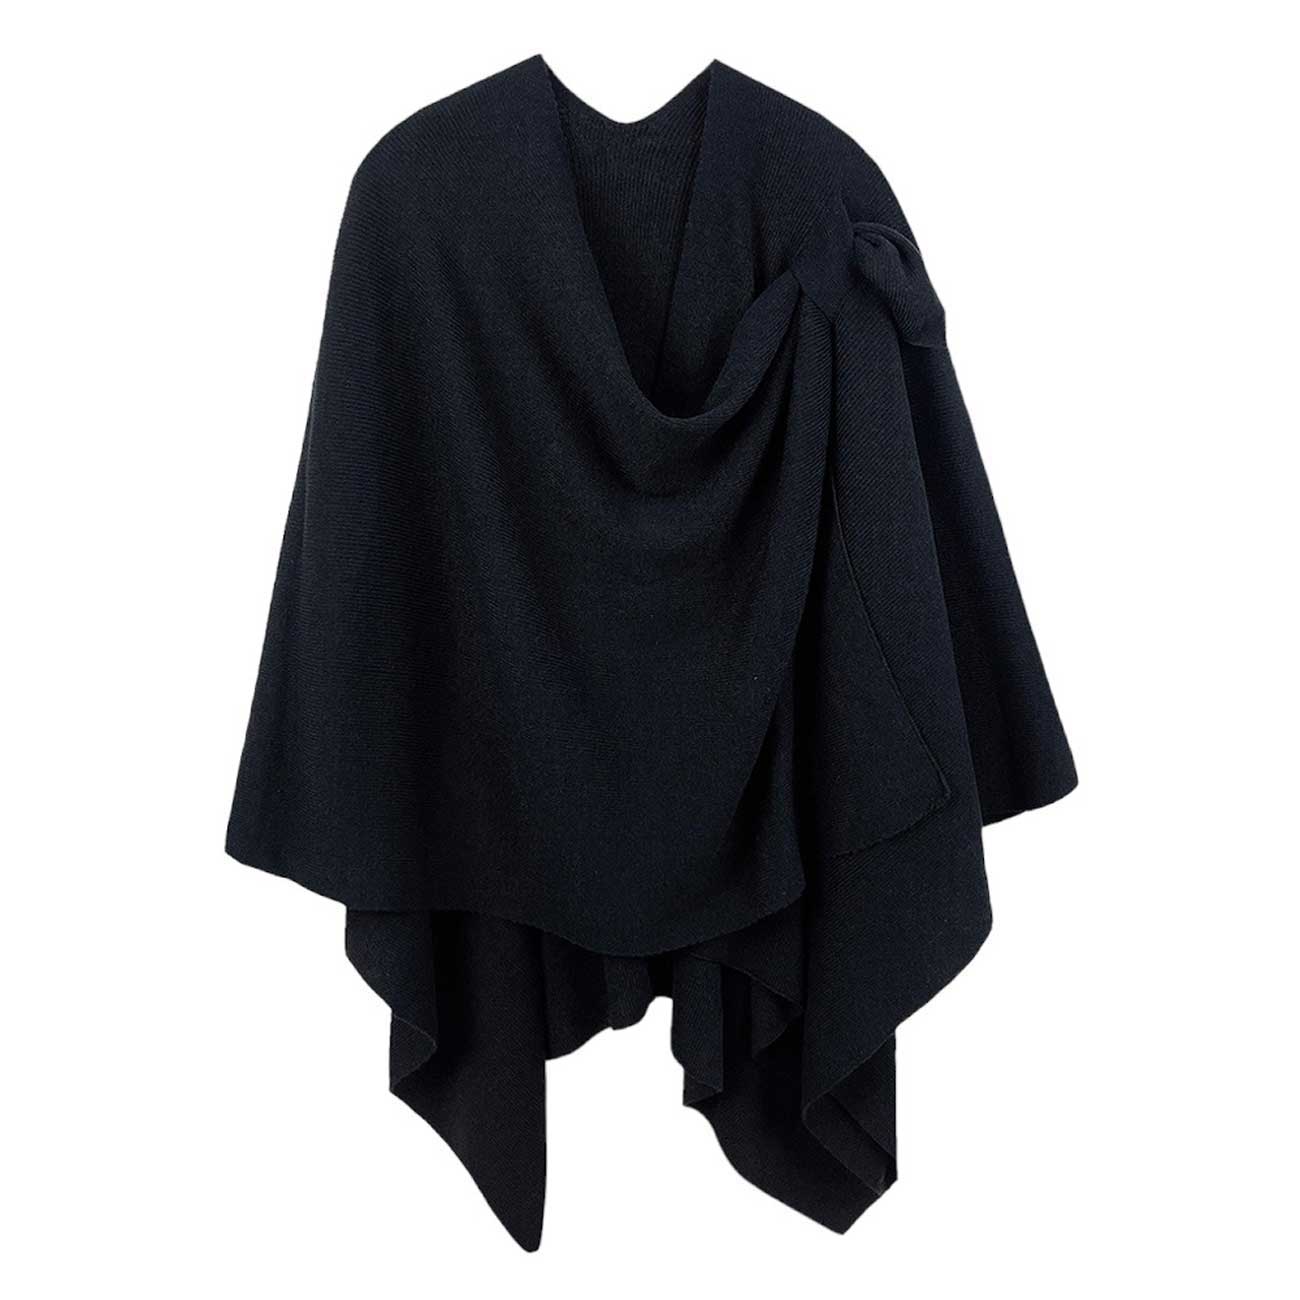 Black Shoulder Strap Solid Ruana Poncho, with the latest trend in ladies outfit cover-up! the high-quality bling border solid neck poncho is soft, comfortable, and warm but lightweight. Stay protected from the chilly weather while taking your elegant looks to a whole new level with an eye-catching, luxurious outfit women! 